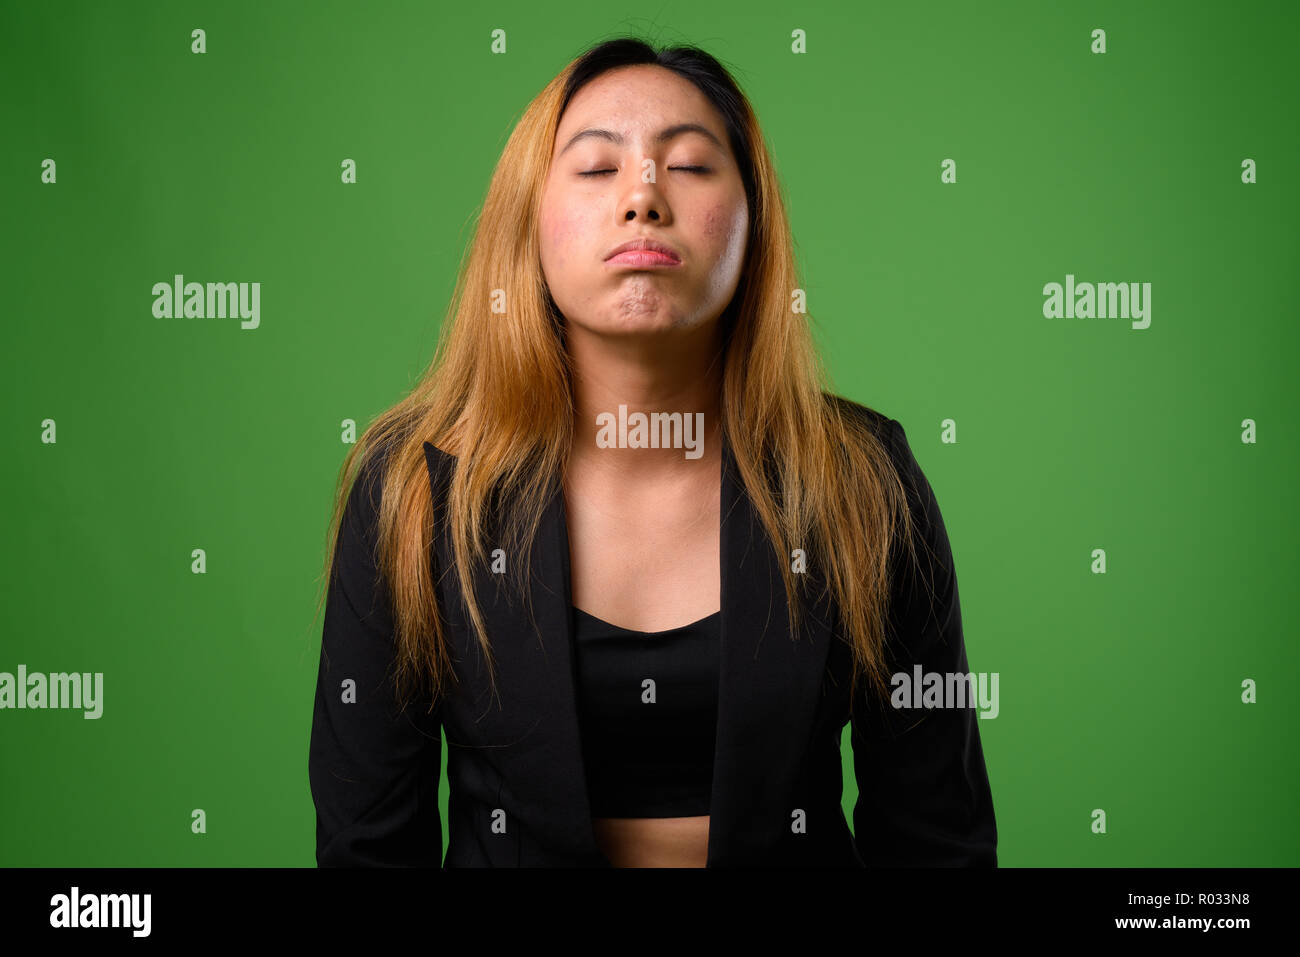 Portrait of young Asian businesswoman against green background Stock Photo